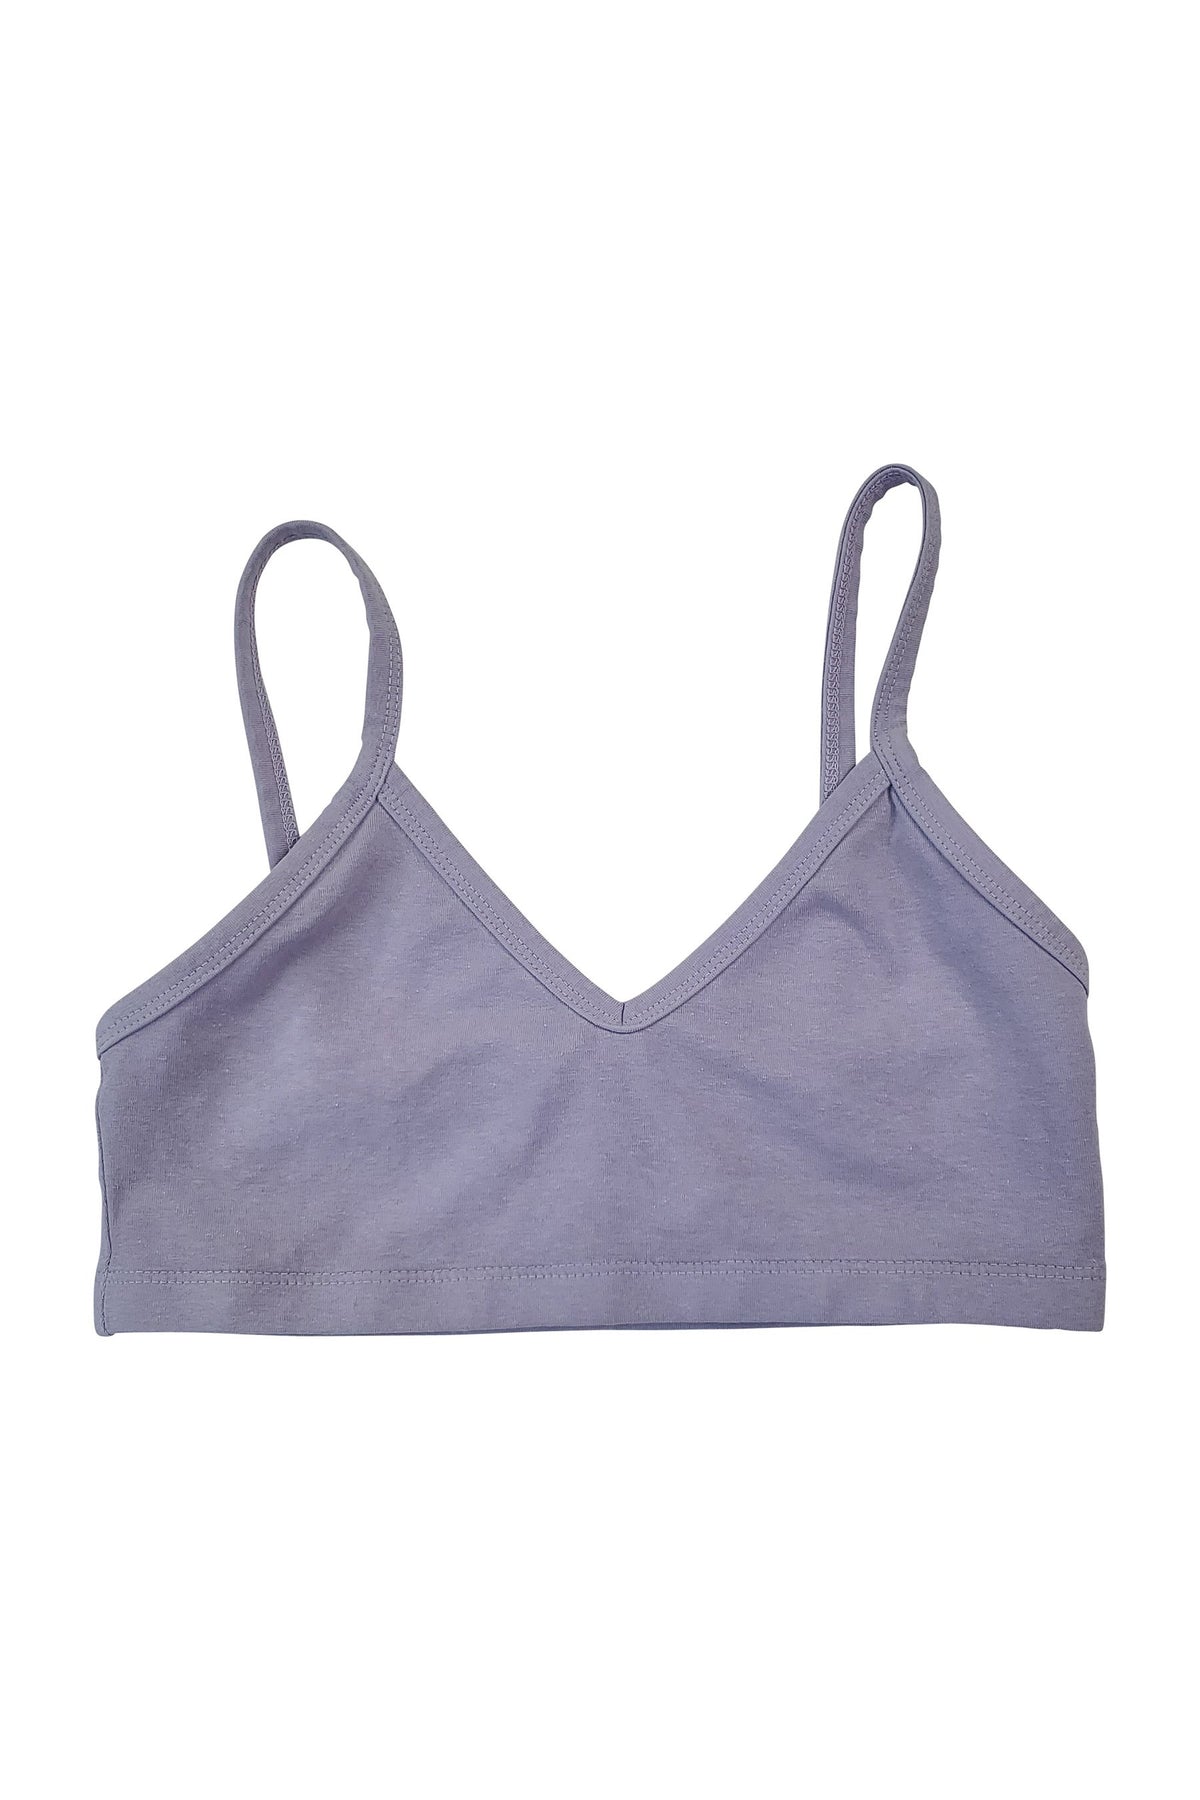 Get a Perfect Fit with Prisma's Mauve Basic Bralette